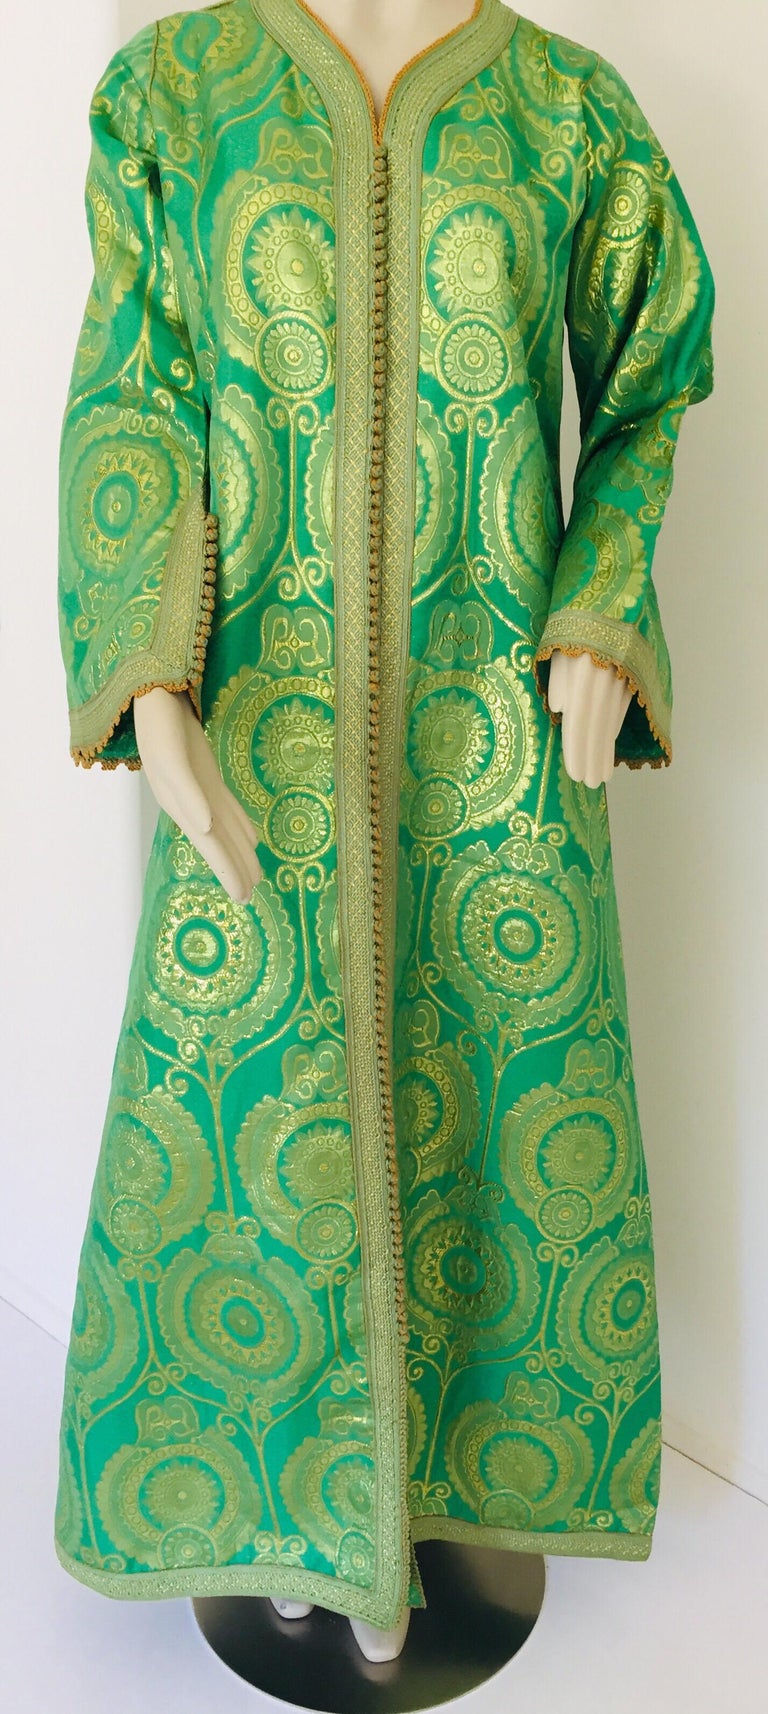 Elegant Moroccan Caftan Lime Green and Gold Metallic Floral Brocade For Sale 6